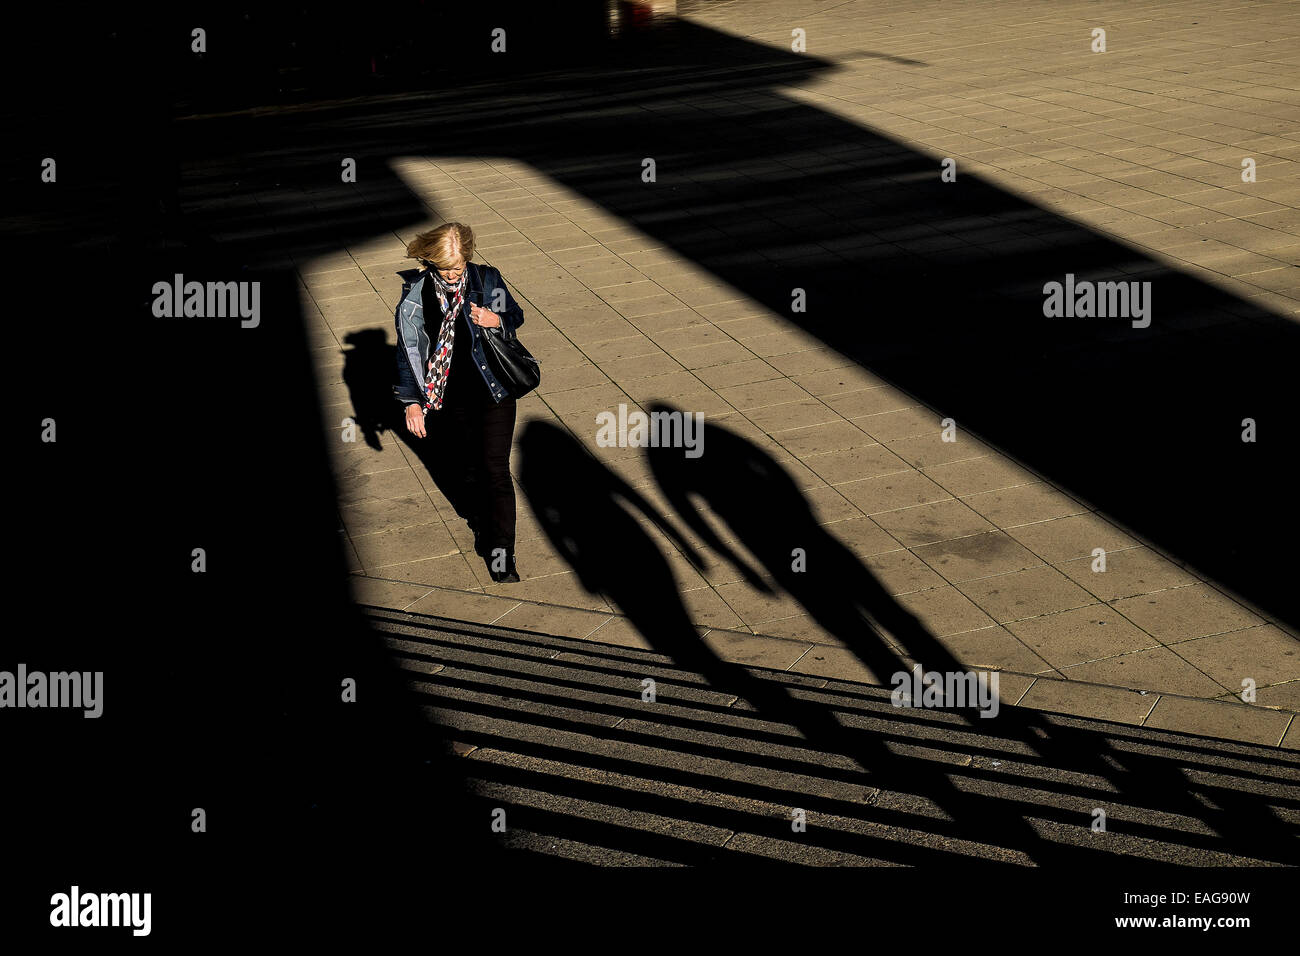 A woman emerging from deep shadows into sunlight. Stock Photo